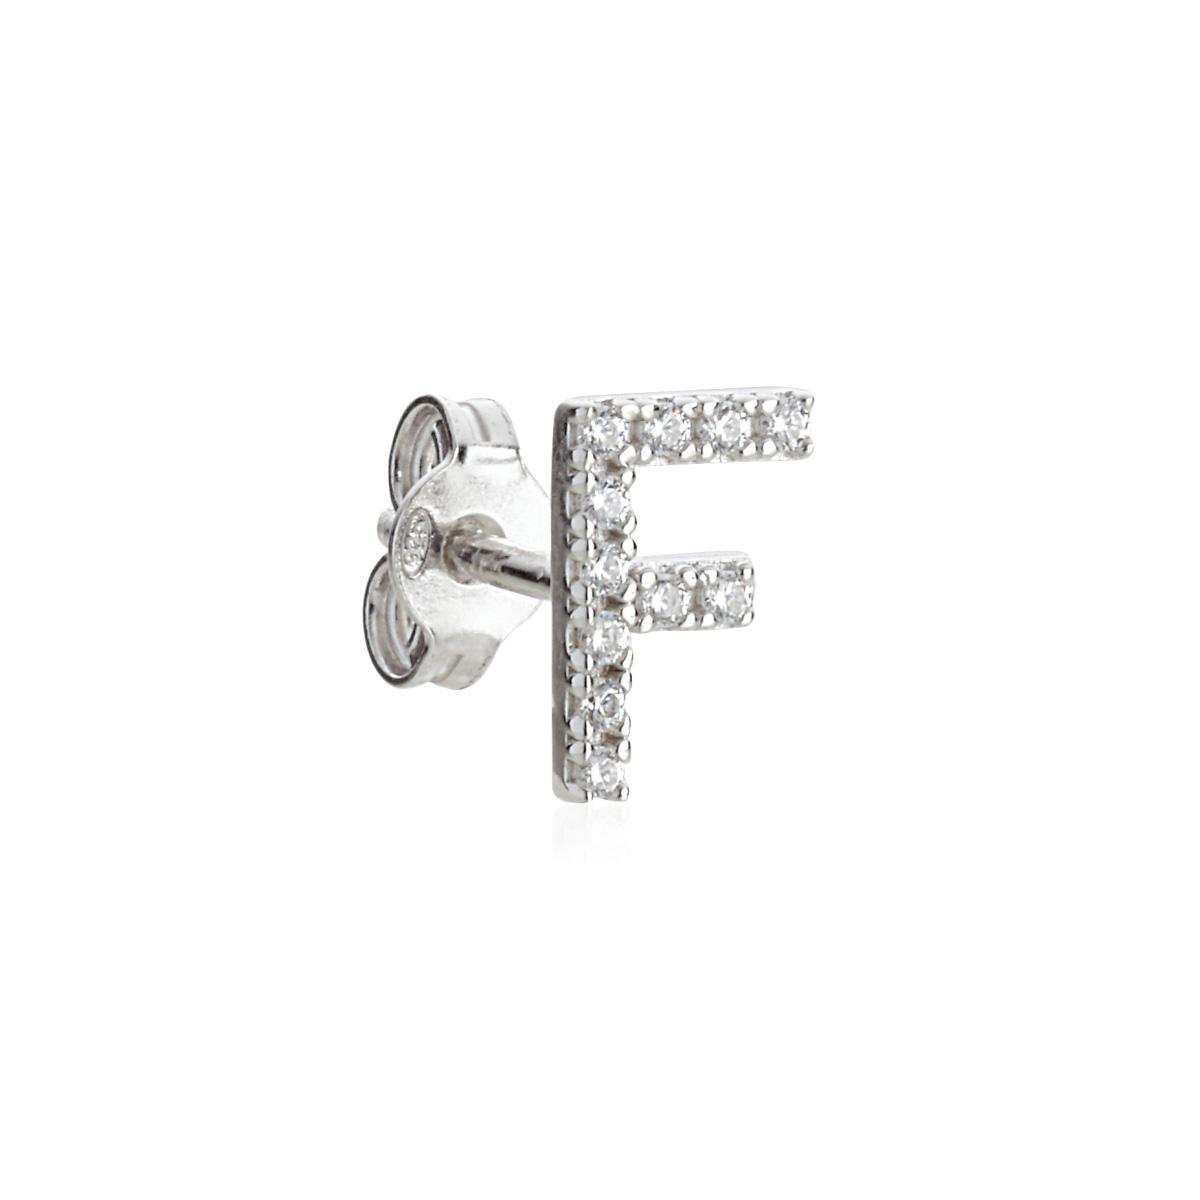 Mono Earring with Zircon Initials in Block Letters - All initials available - ZOS3